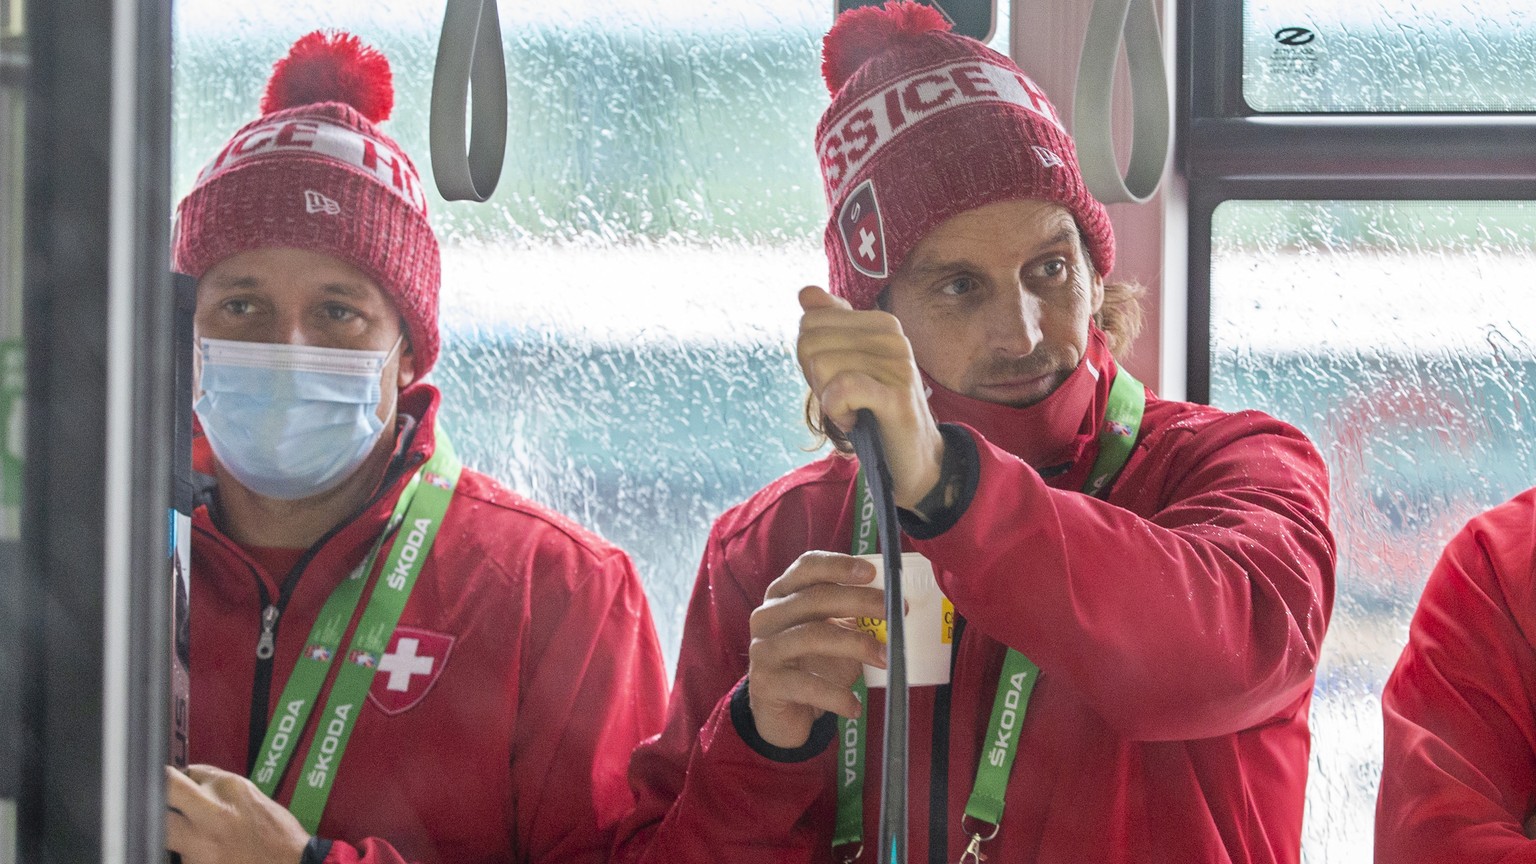 Patrick Fischer, 2nd left, head coach of Switzerland national ice hockey team, right, and Marco Bayer, left, assistant coach of Switzerland national ice hockey team, leave the Olympic Sports Center on ...